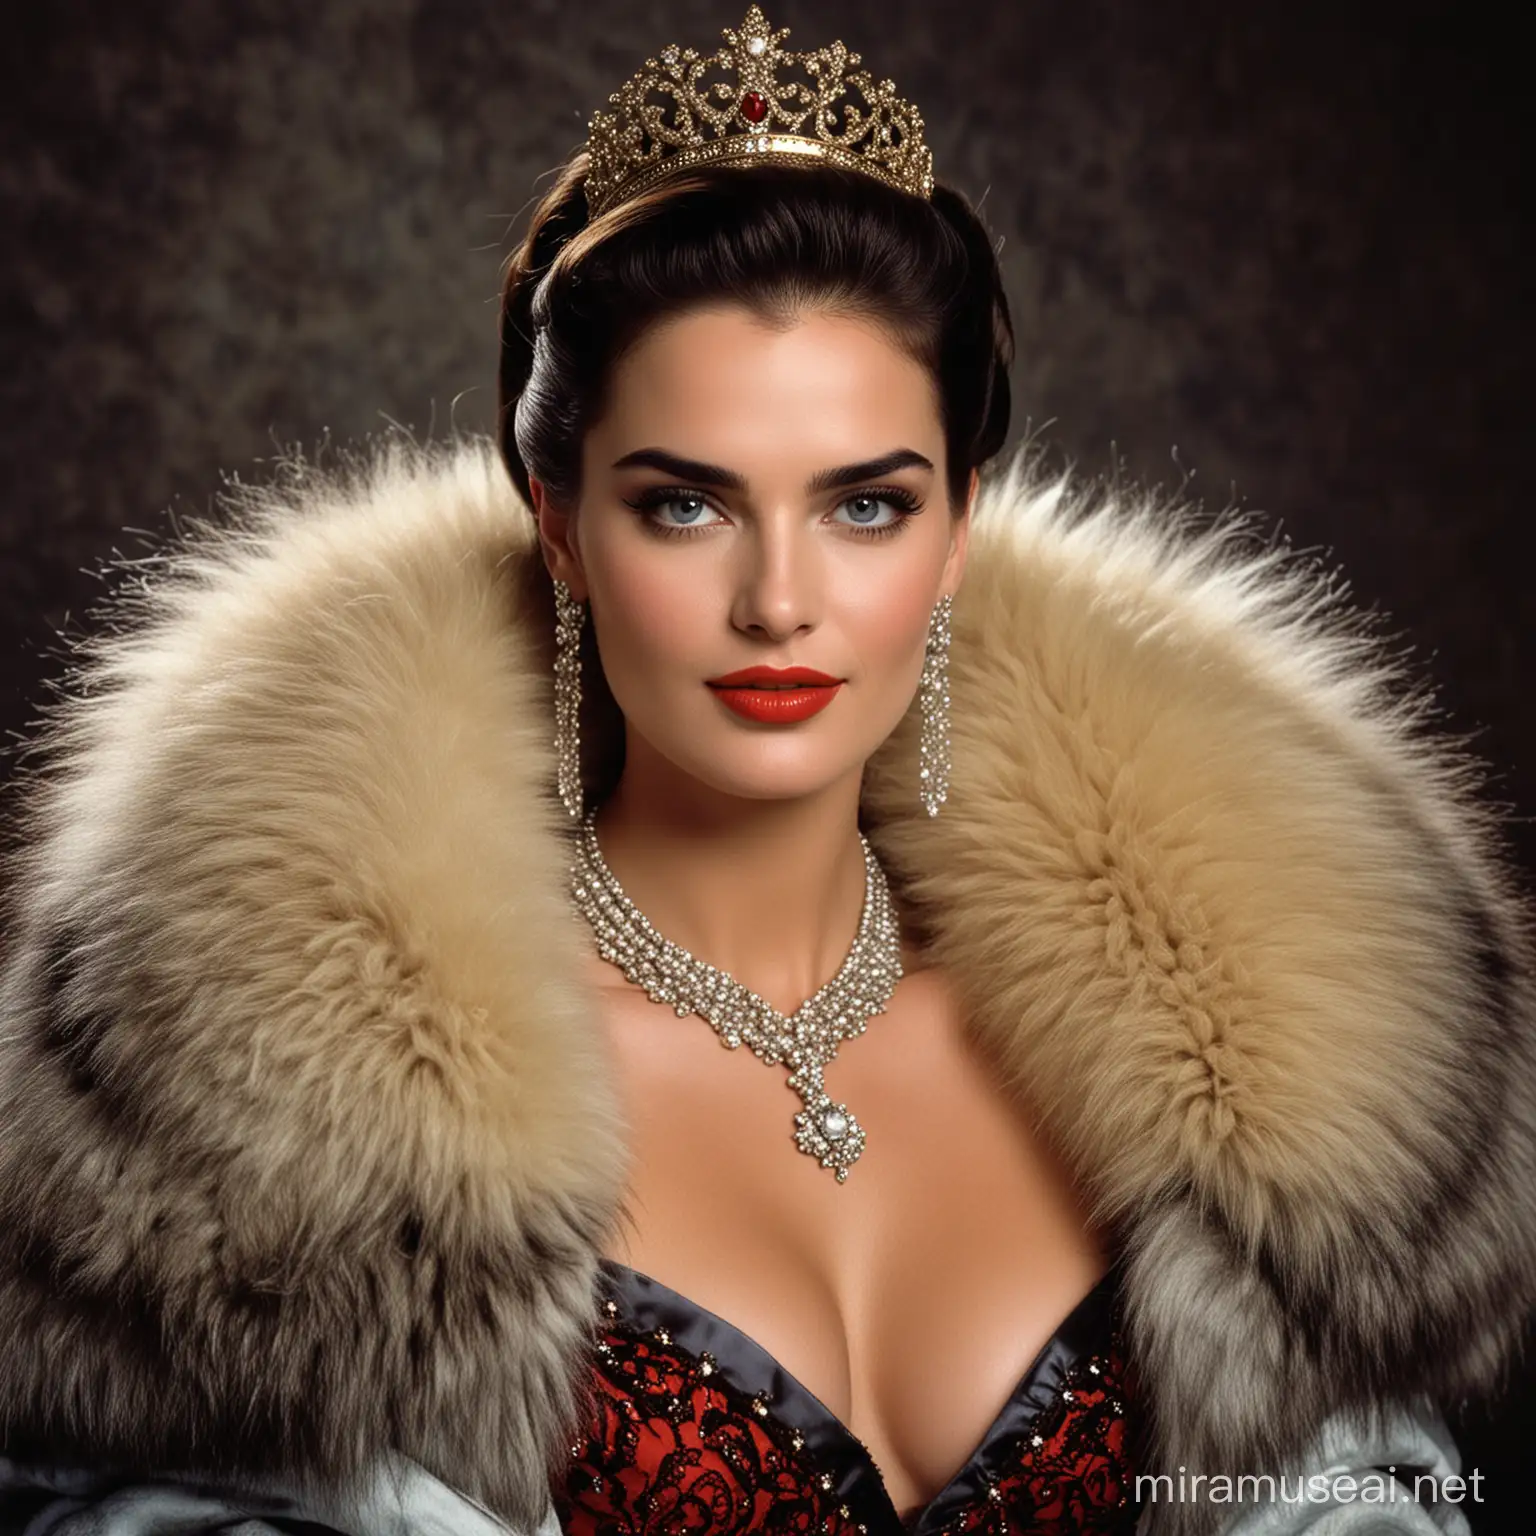 Vintage Glamour Portrait of a Young Woman in Fur Coat and Diamond Necklace